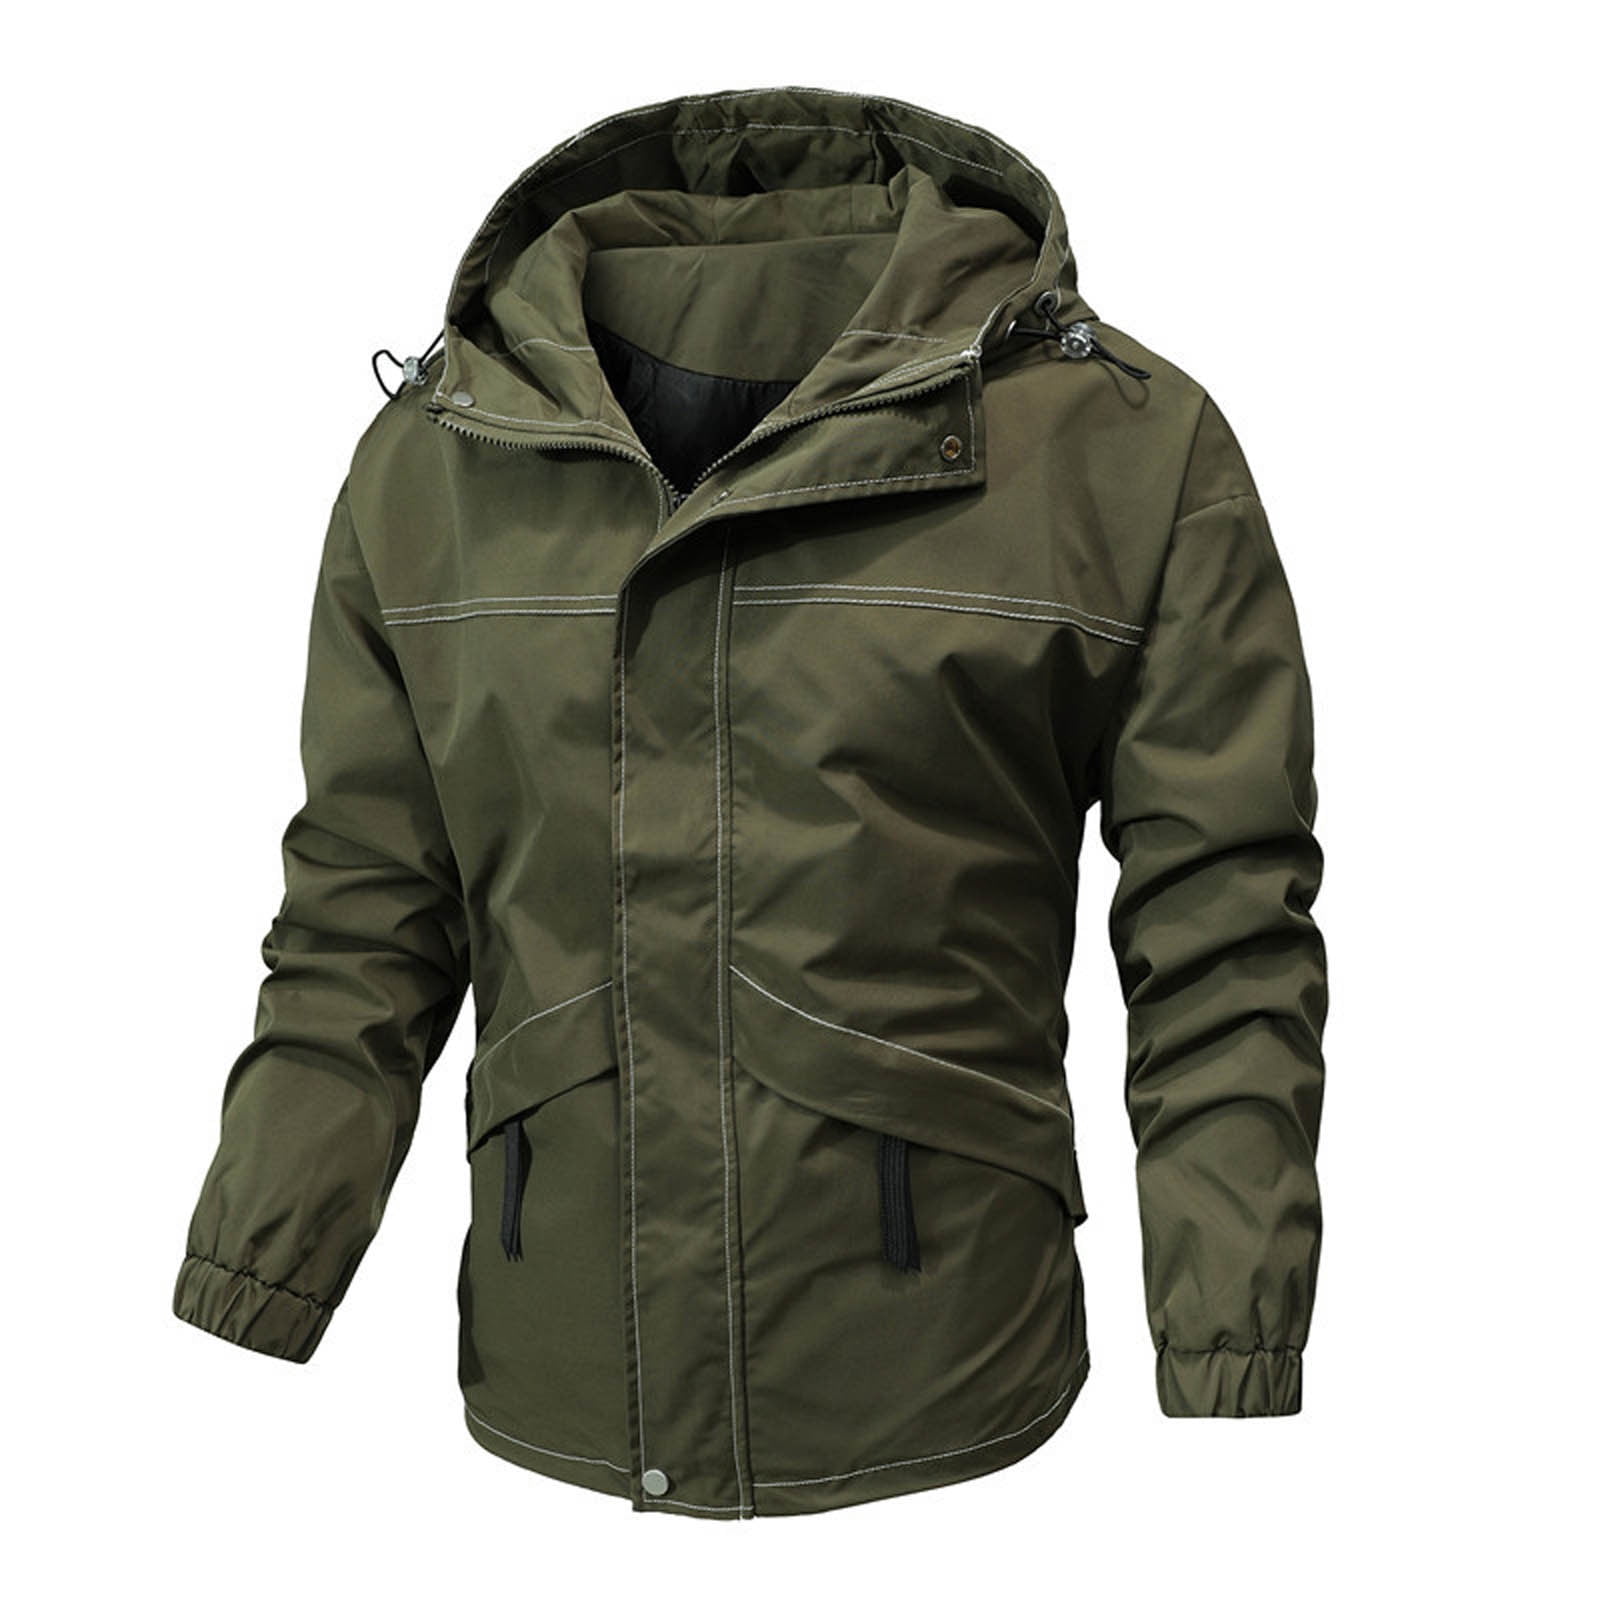 LBECLEY Men's Jackets with Hood Autumn Winter Fashion Casual Windproof ...